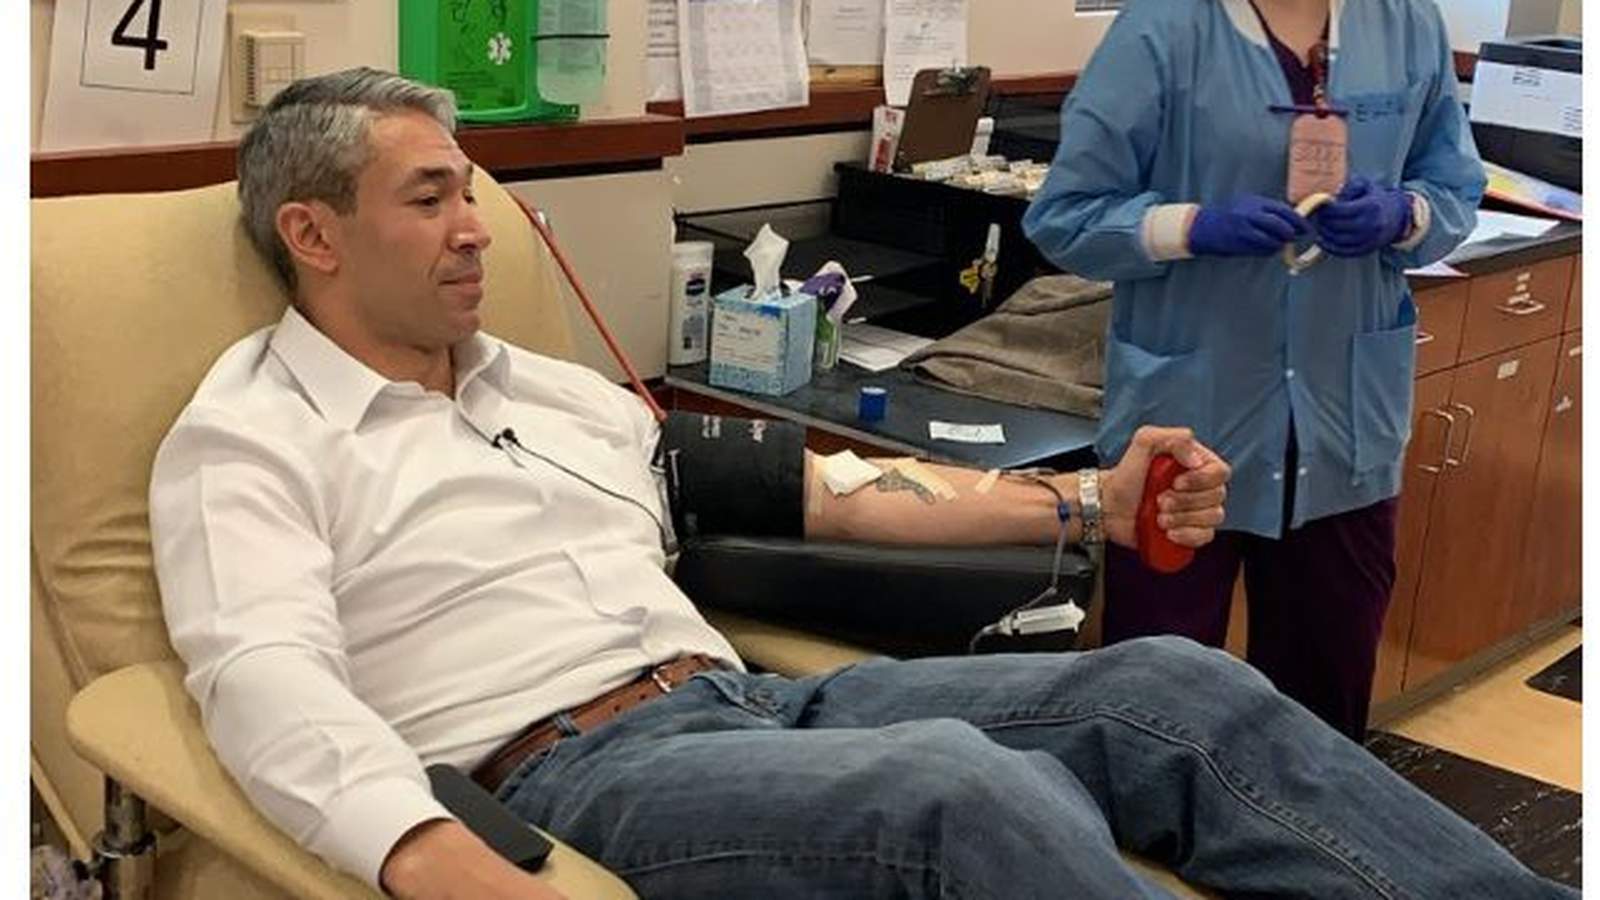 Health officials: South Texas blood supply at risk of collapsing due to lack of donations